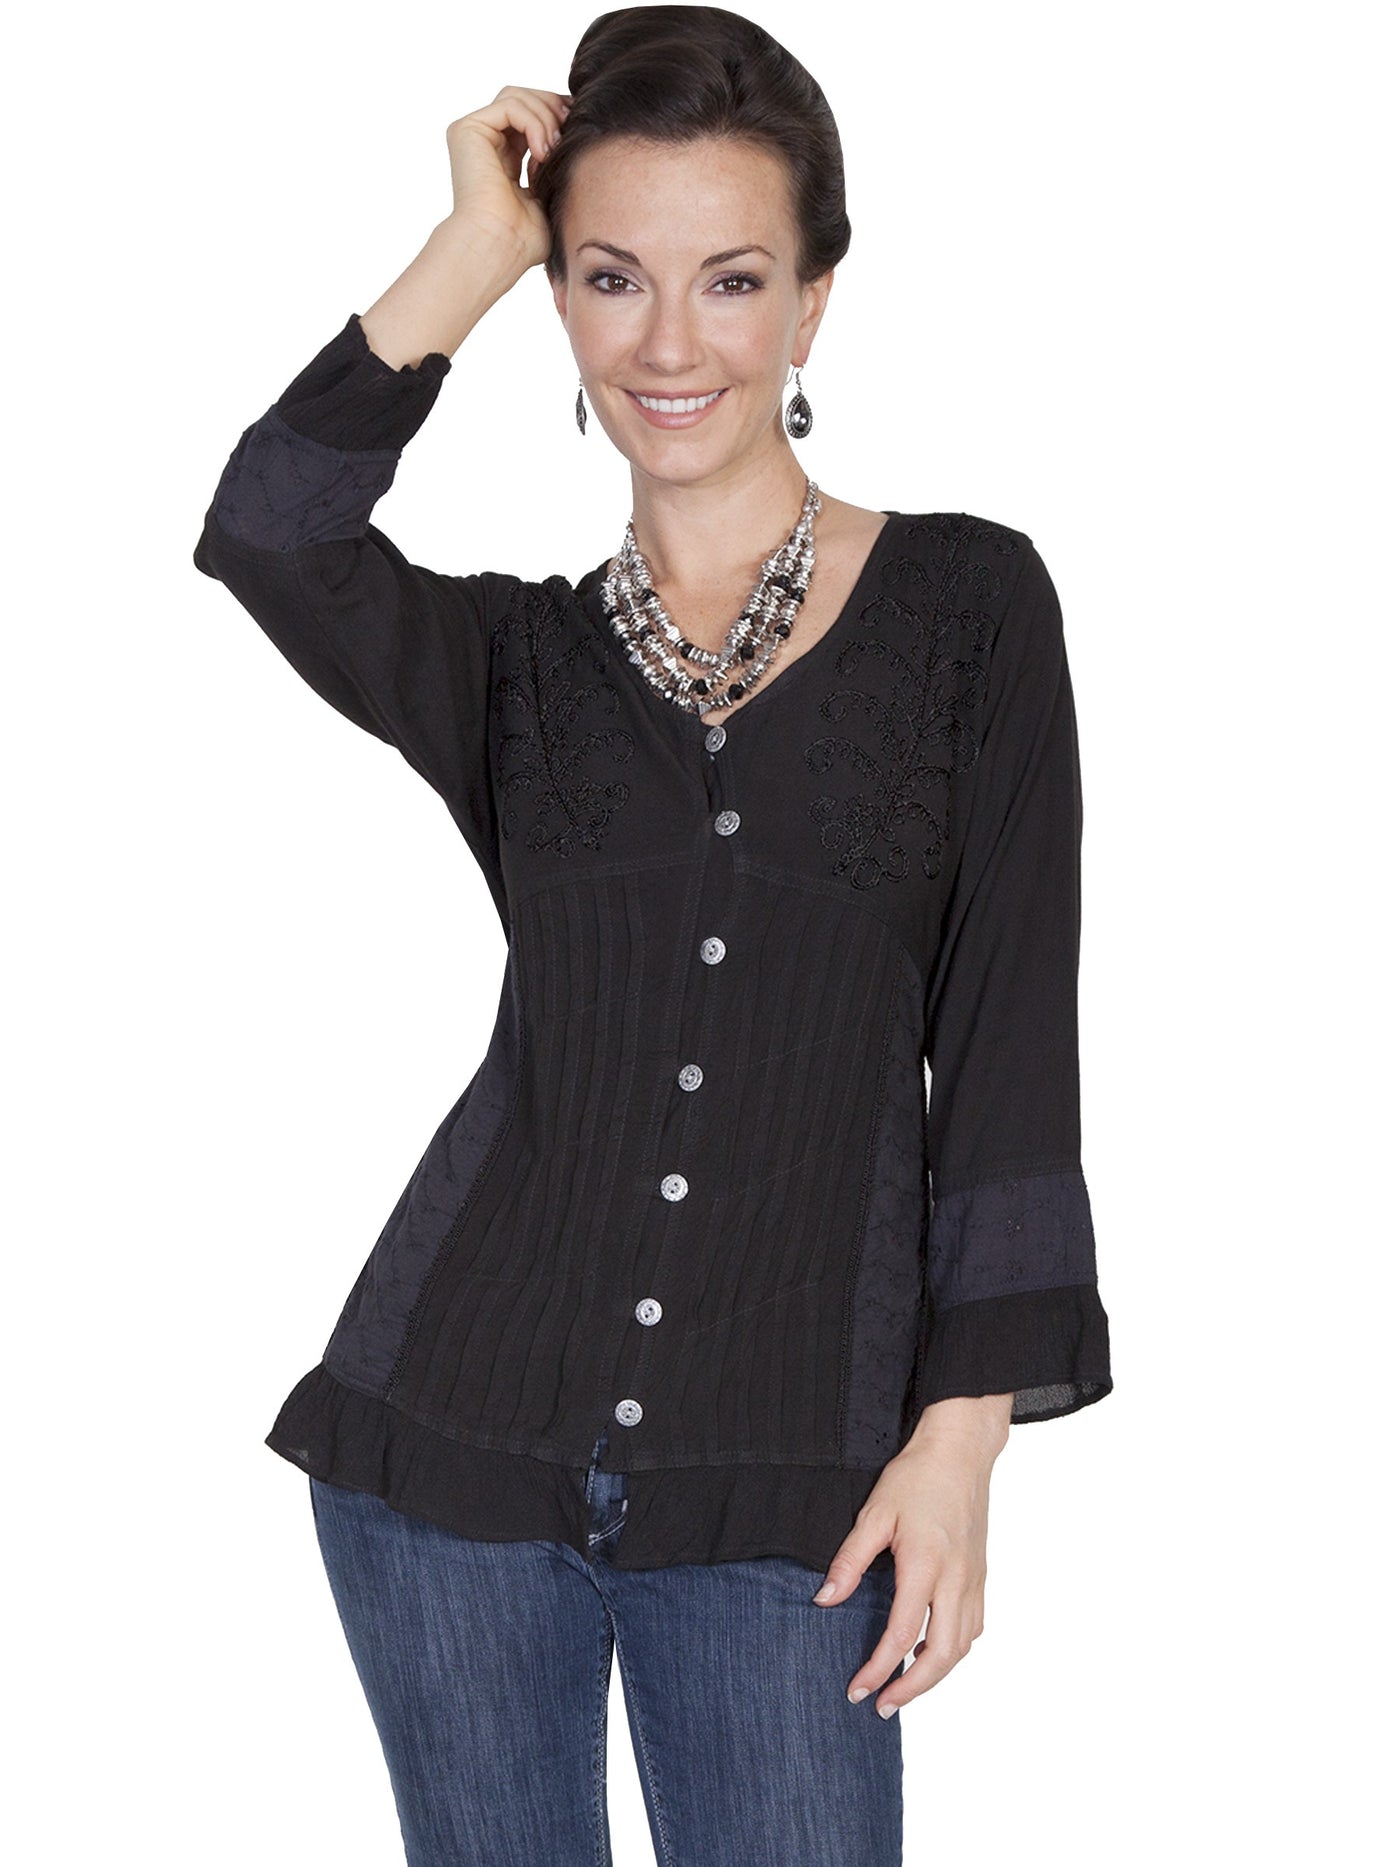 Prairie Ruffled Blouse in Black - SOLD OUT